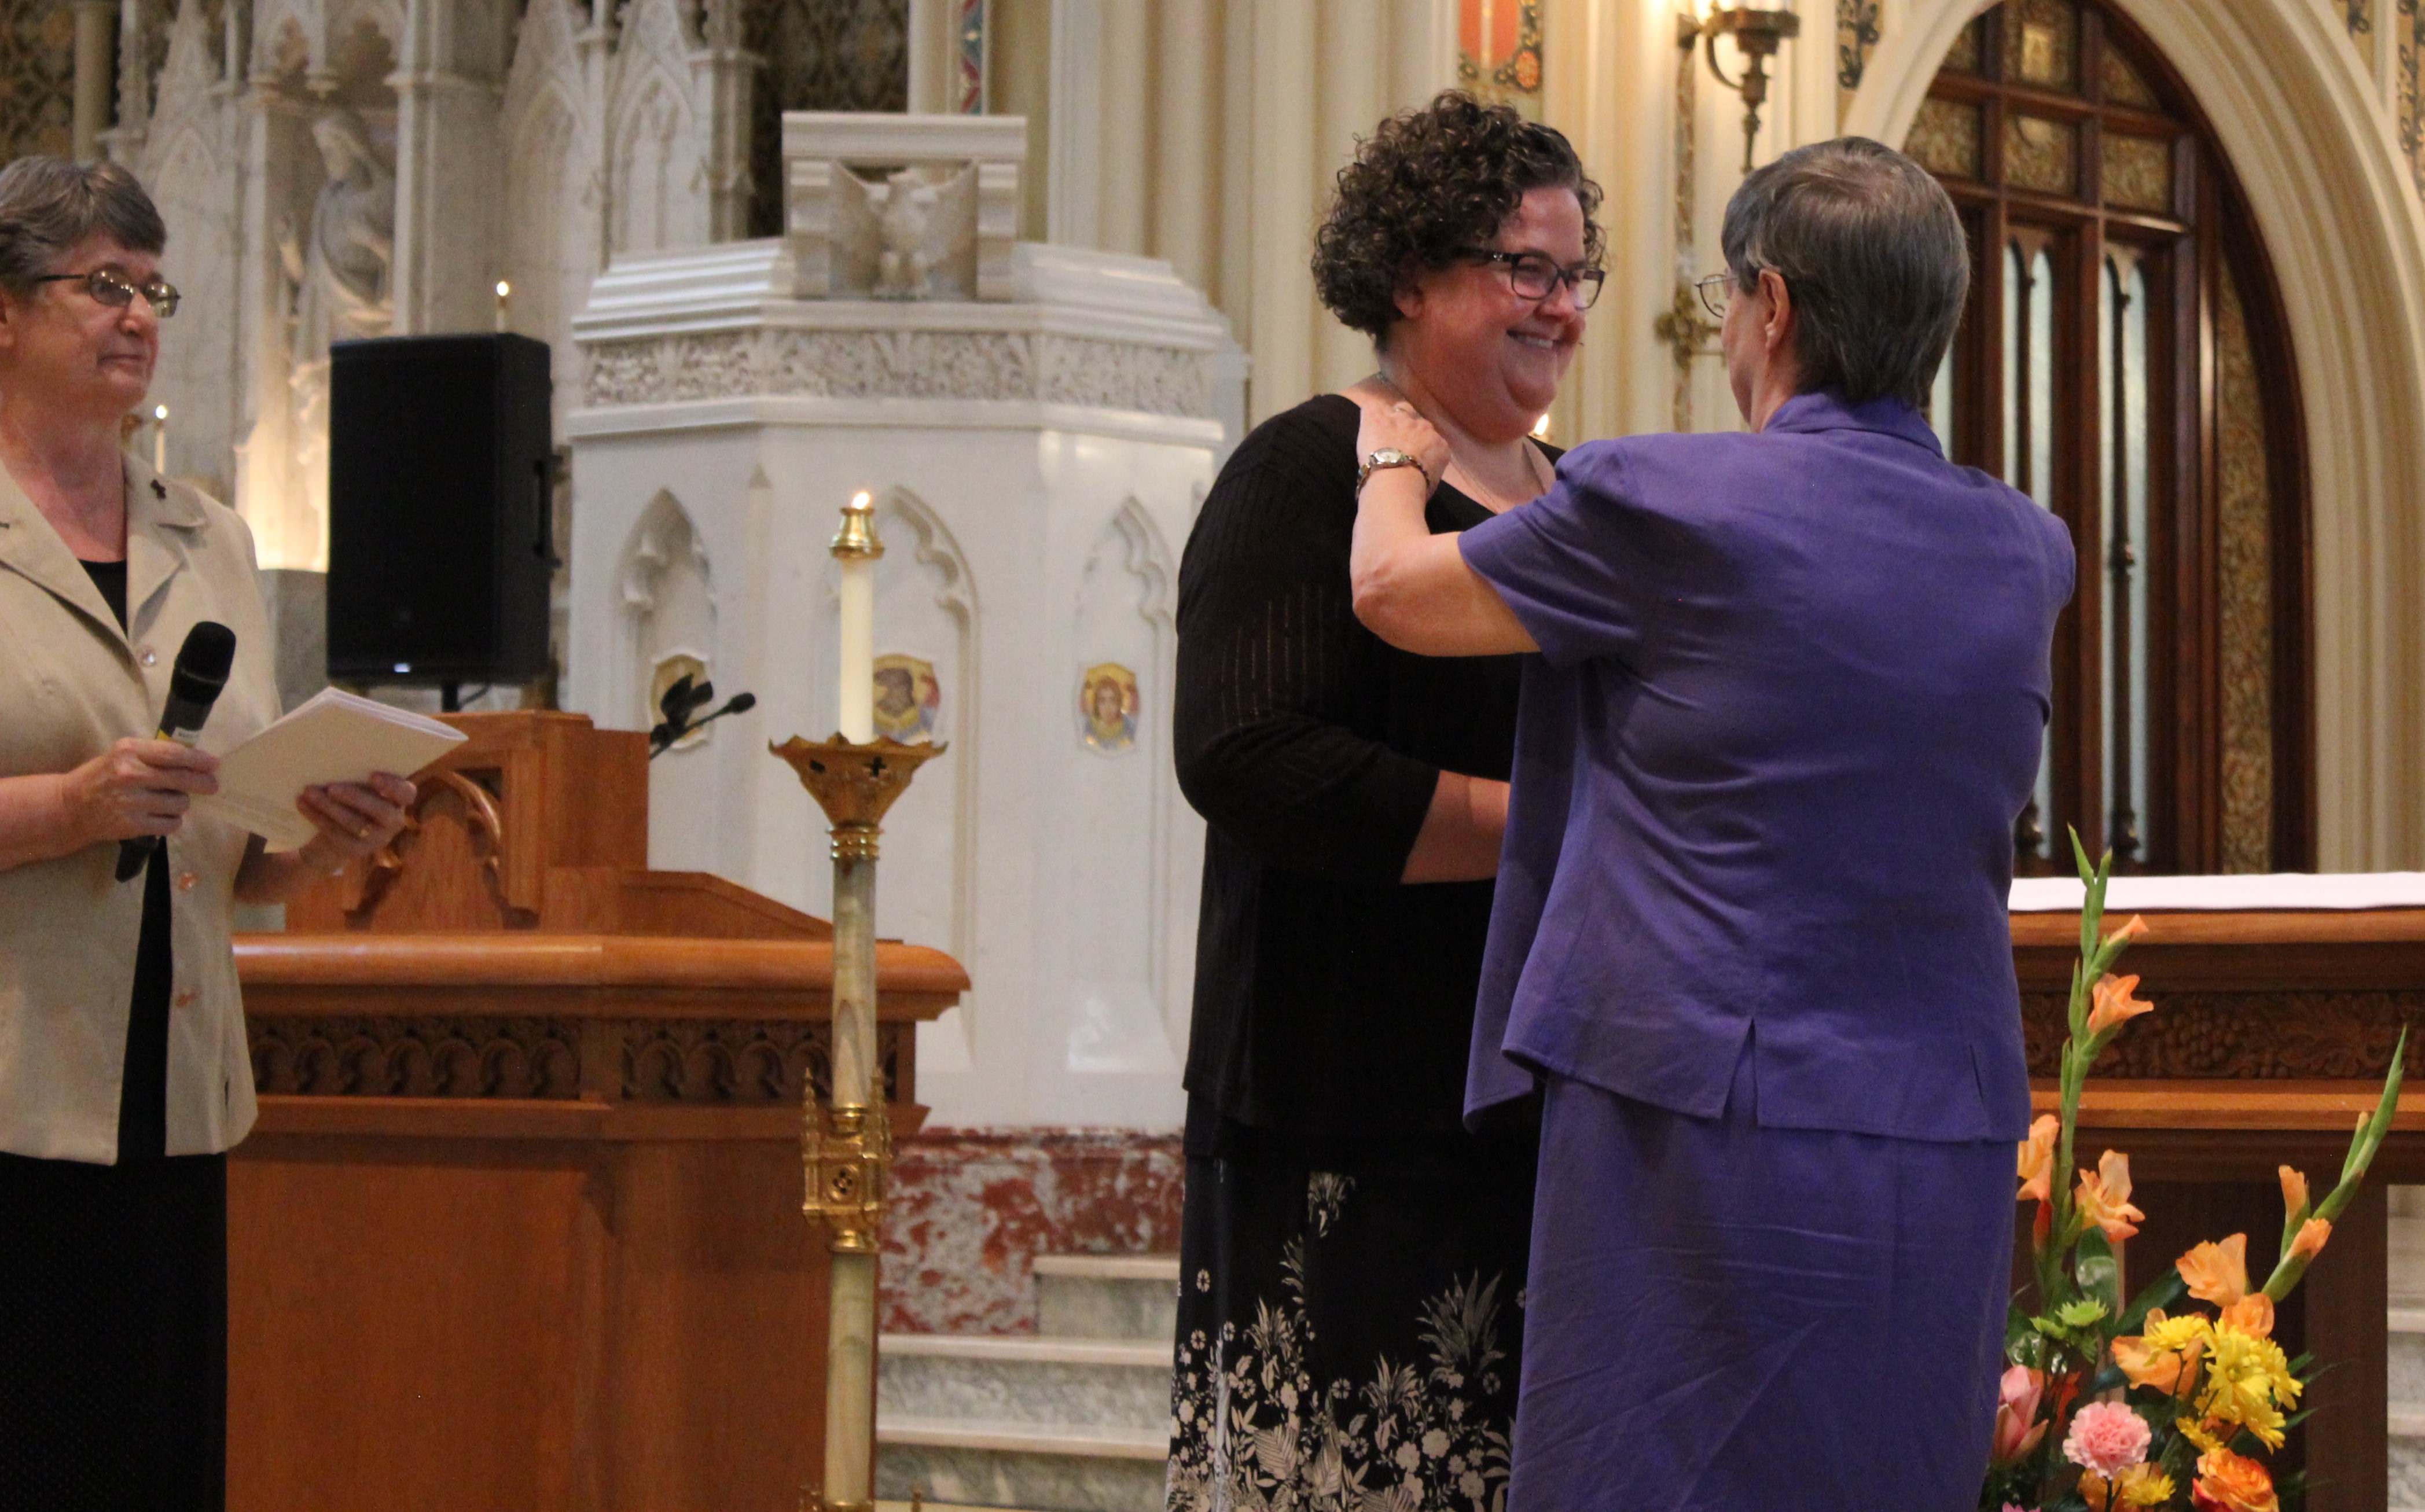 Sr. Melissa Cessac celebrates her first profession of vows as a member of the Congregation of Divine Providence in San Antonio, Texas, on July 24, 2020. She said A Nun's Life ministry was helpful when she was discerning religious life. (Courtesy of Melissa Cessac)